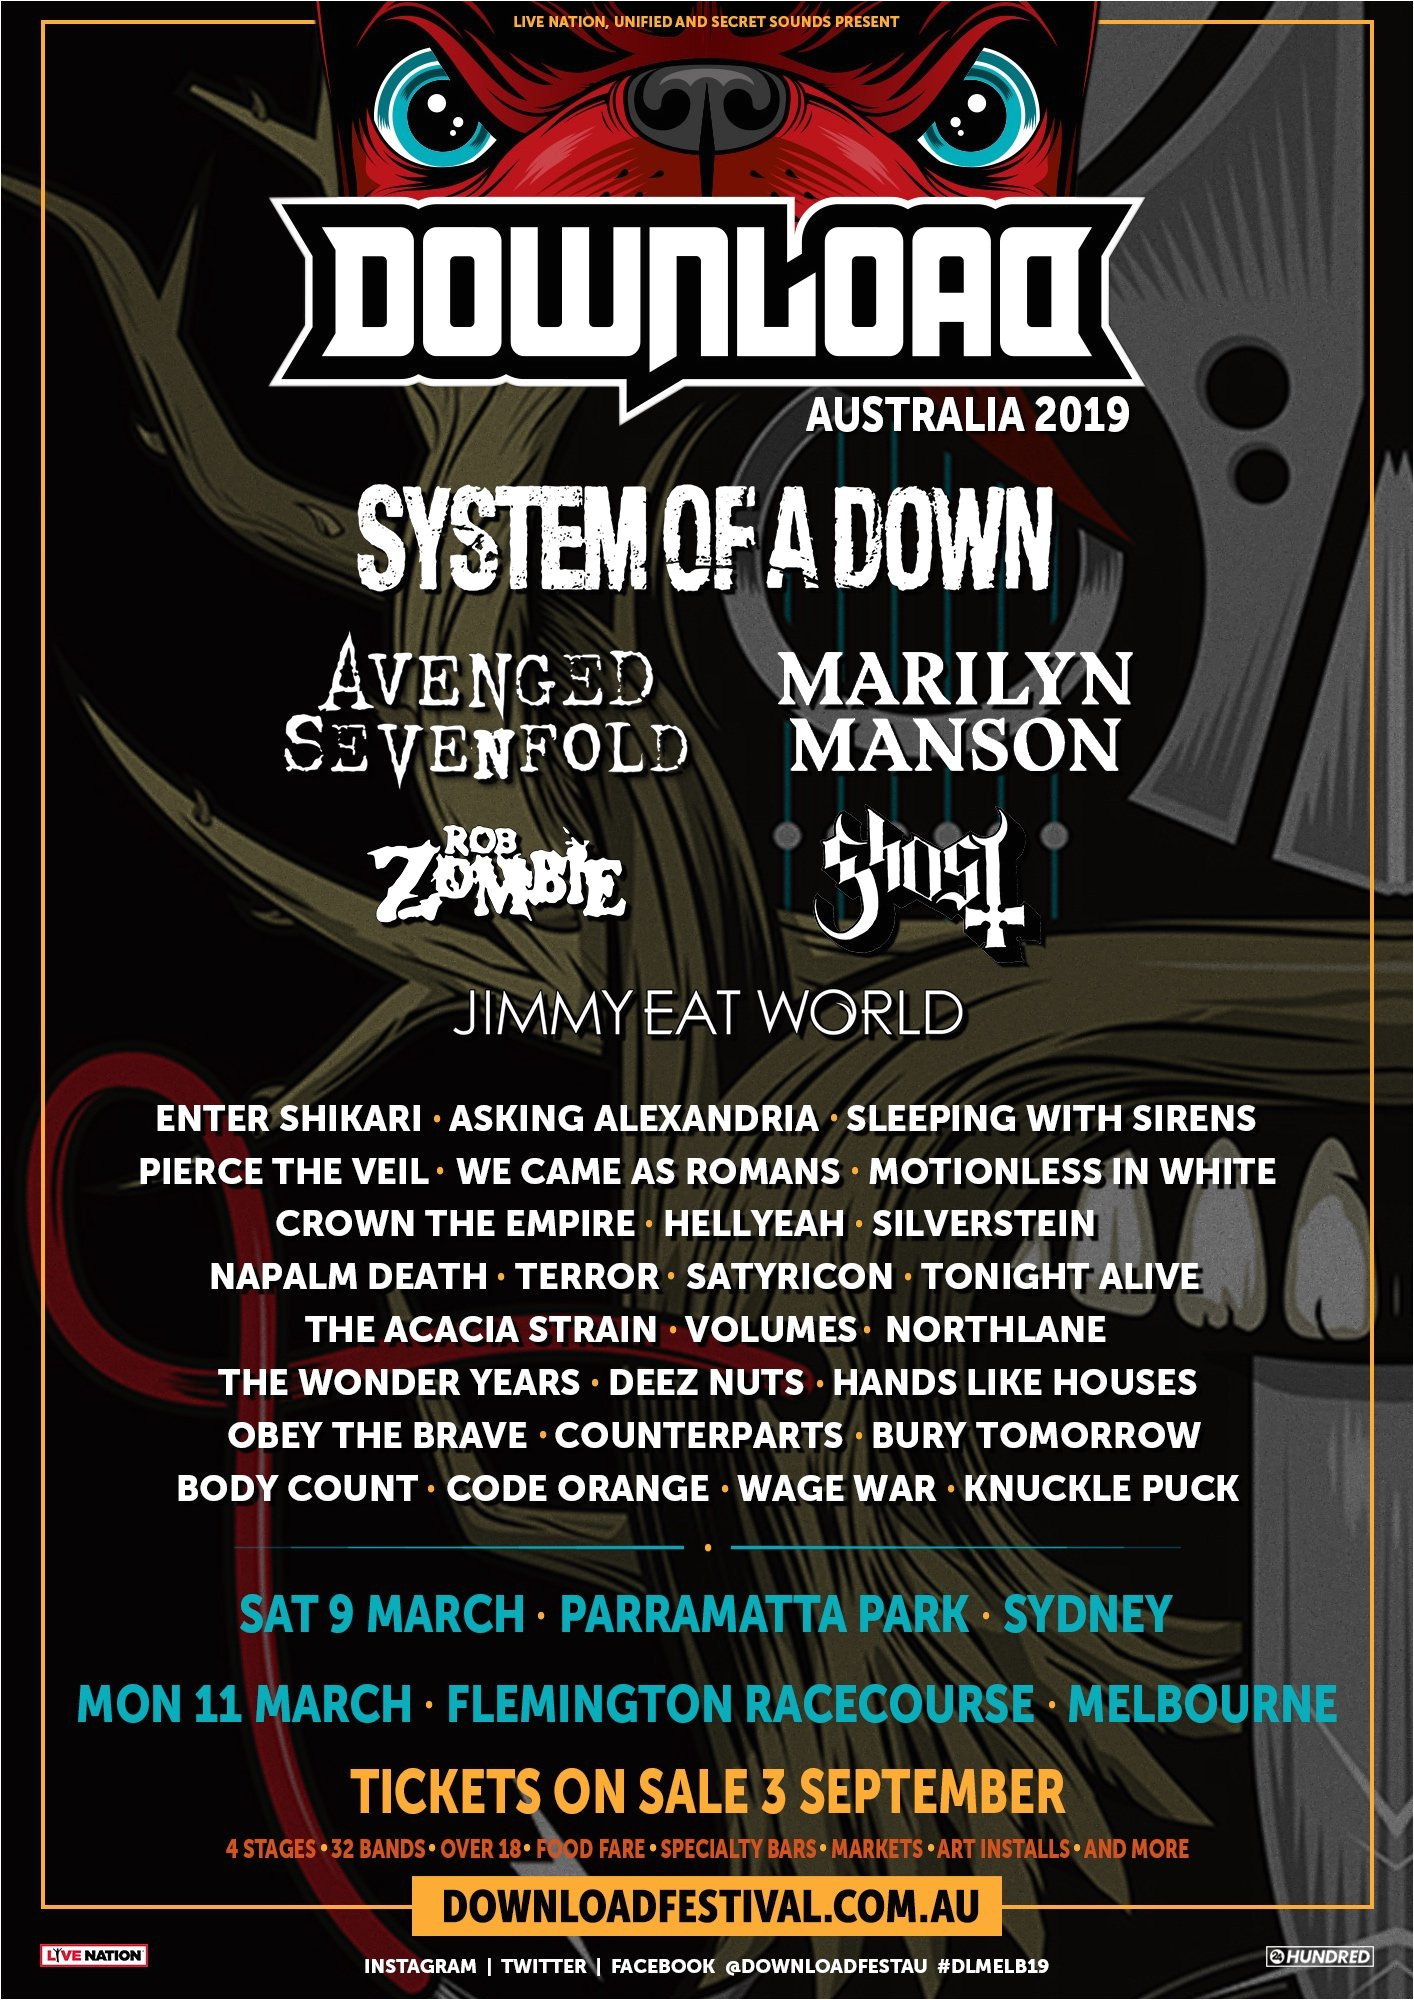 Mesa Arts and Crafts Festival 2019 Yep that Download Festival Australia 2019 Lineup Poster is Fake